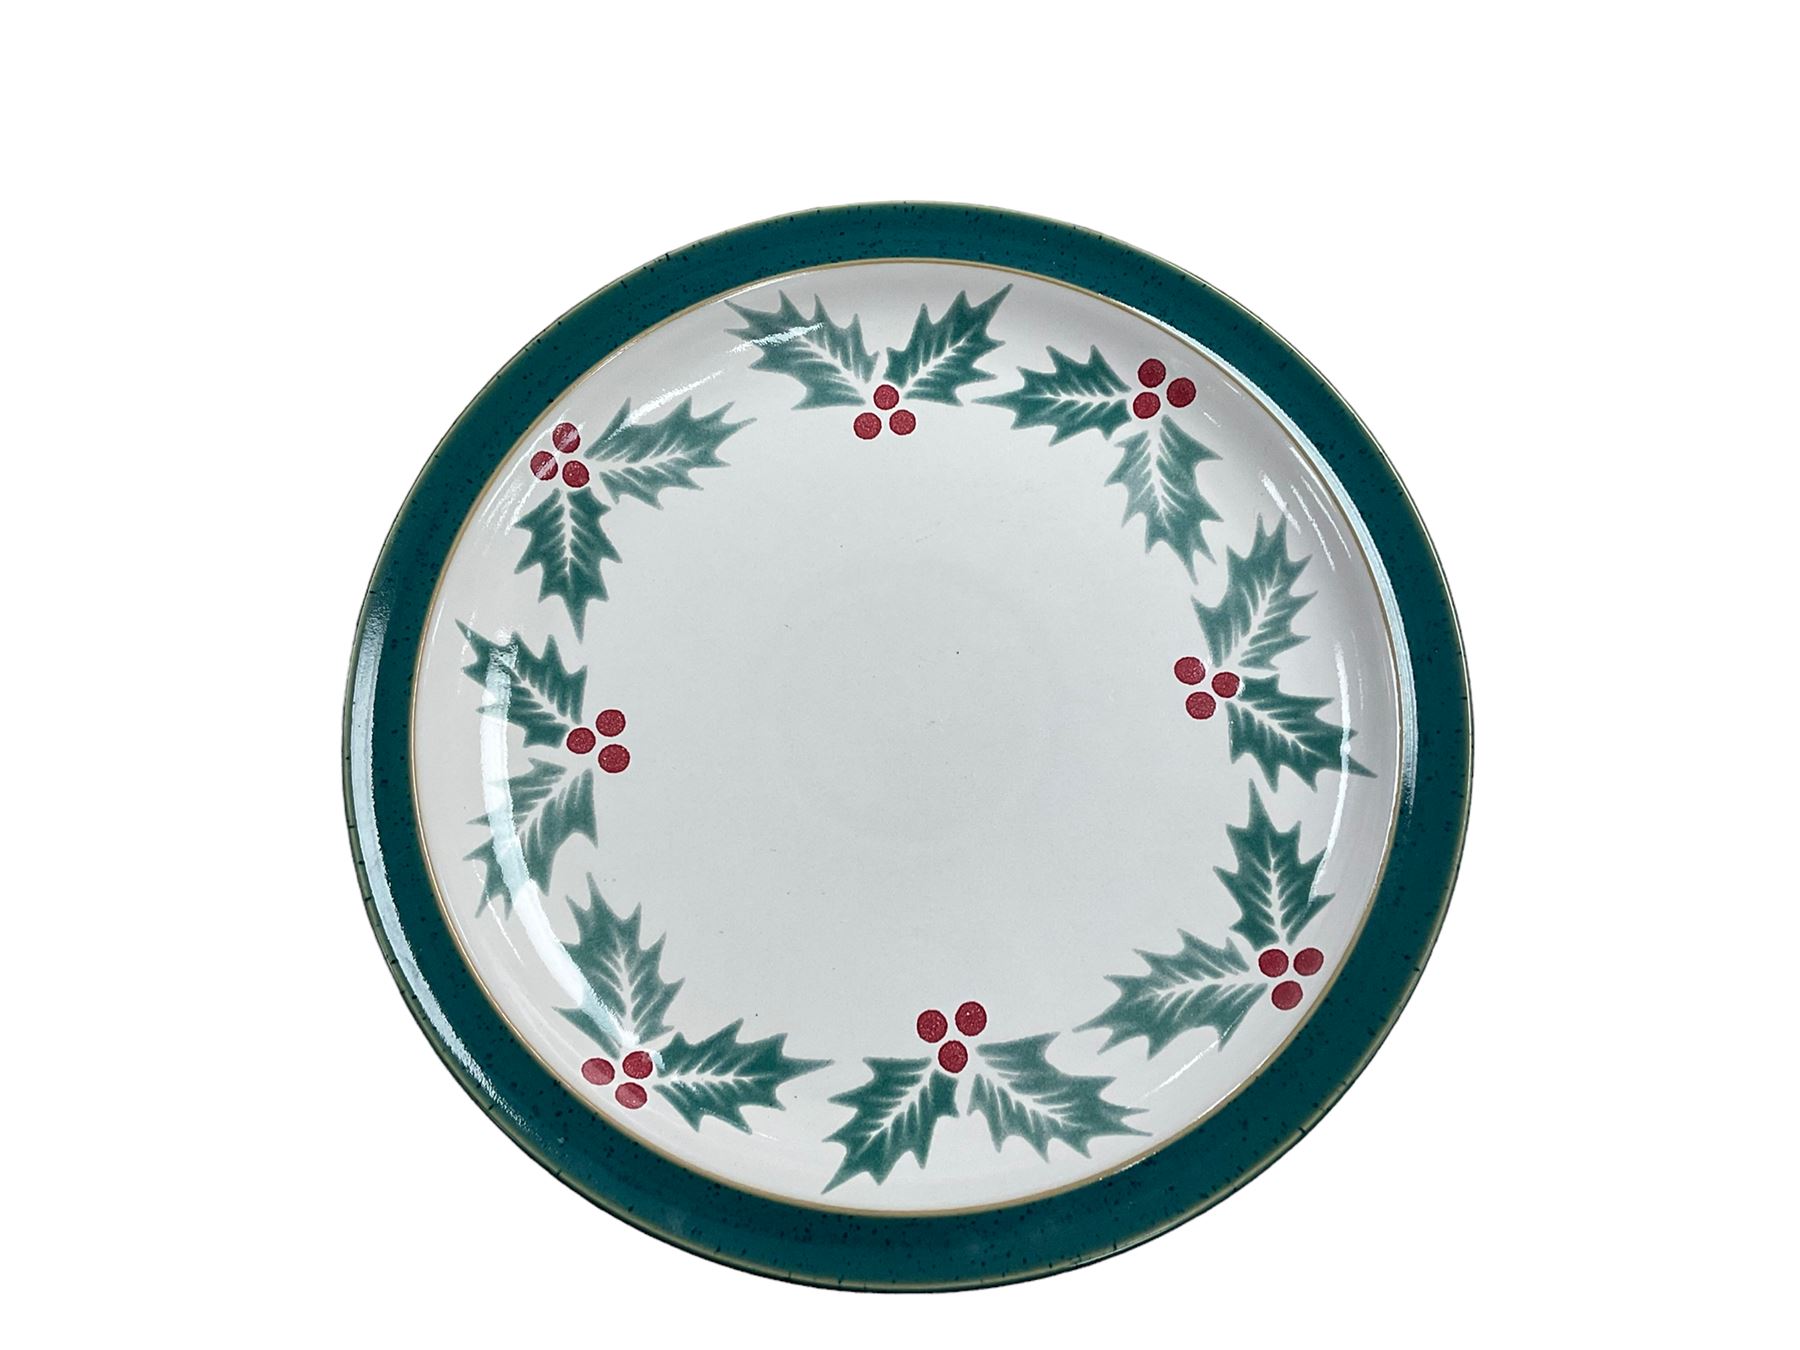 Denby Holly pattern Christmas ceramics - Image 2 of 4